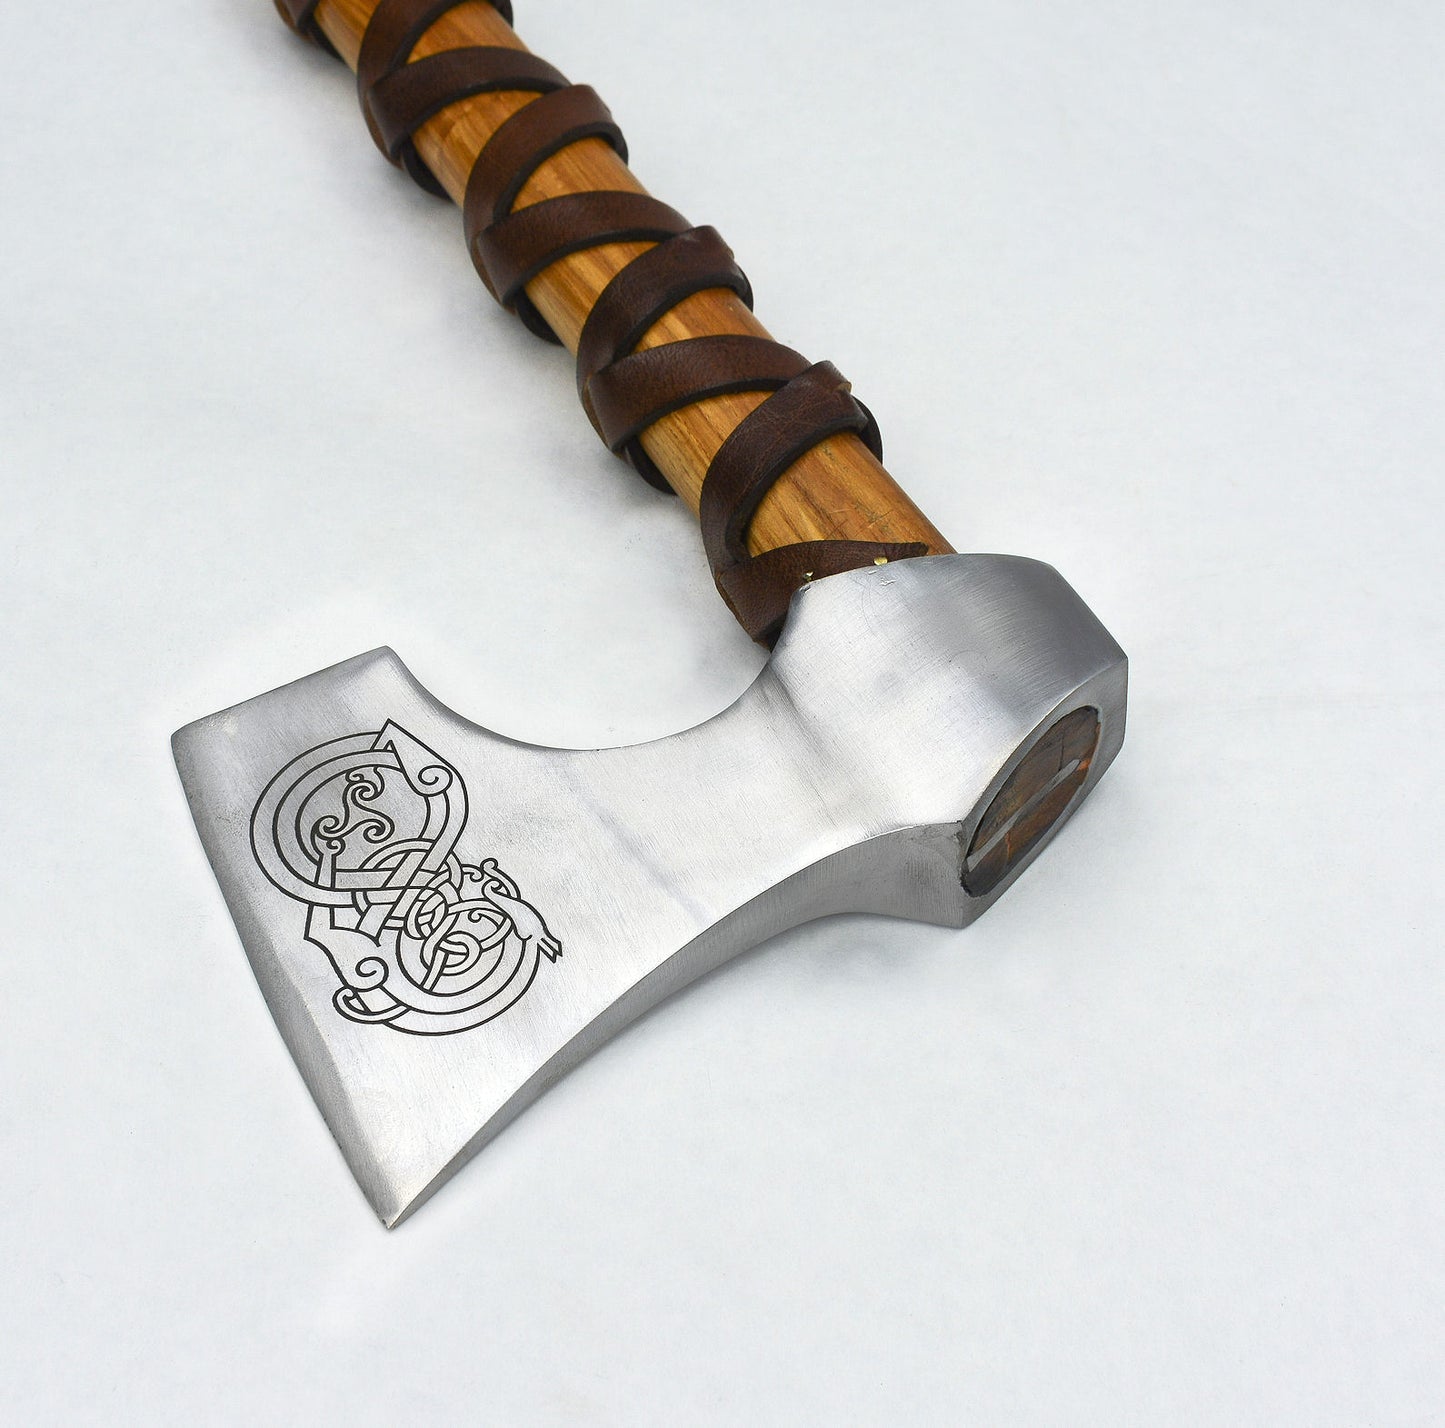 Viking Type D Axe with Etched Norse Design